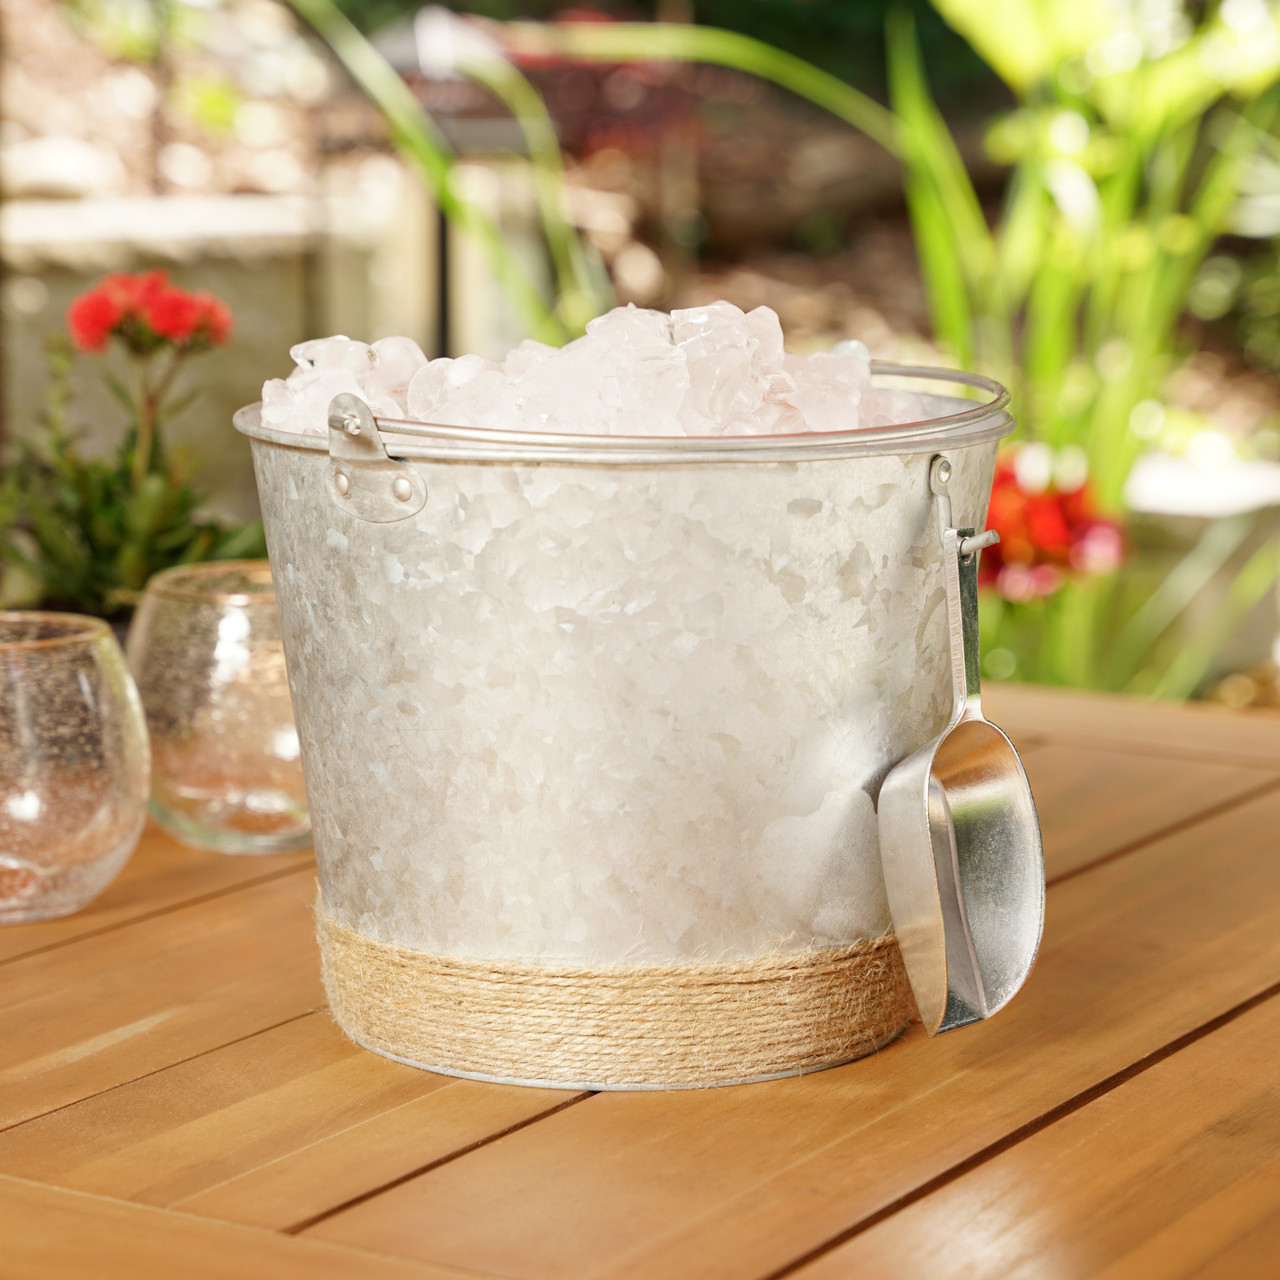 Jute Wrapped Galvanized Ice Bucket by Twine